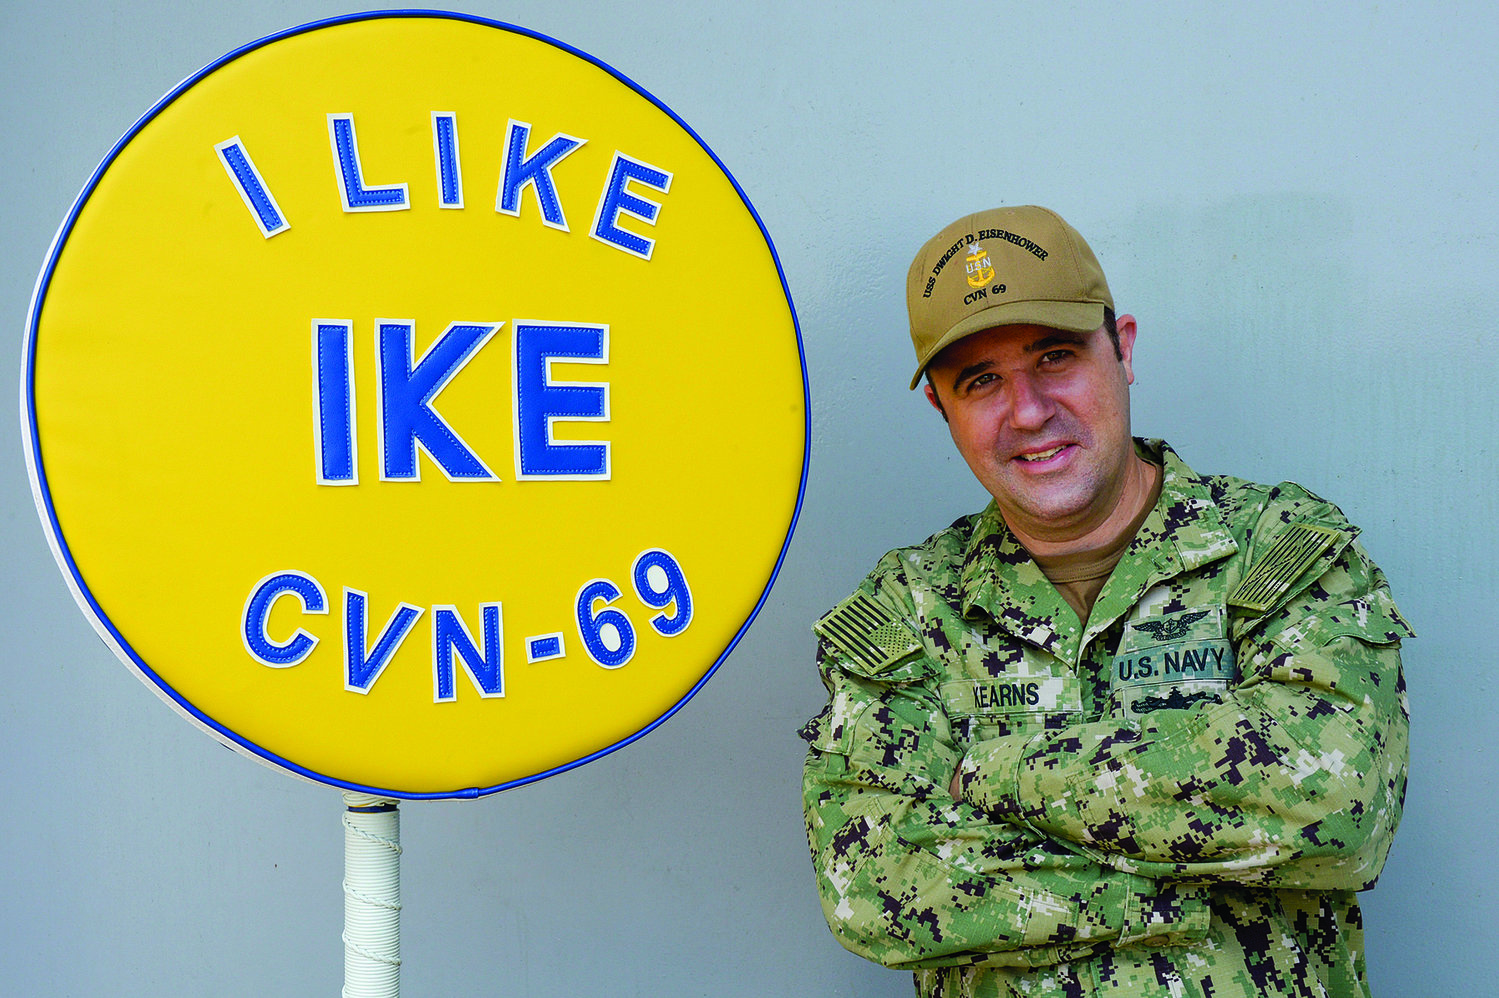 Senior Chief Petty Officer Brian Kearns, a 1998 Pennsbury High School graduate, is serving aboard one of the world’s largest warships, the U.S. Navy aircraft carrier USS Dwight D. Eisenhower (CVN 69).